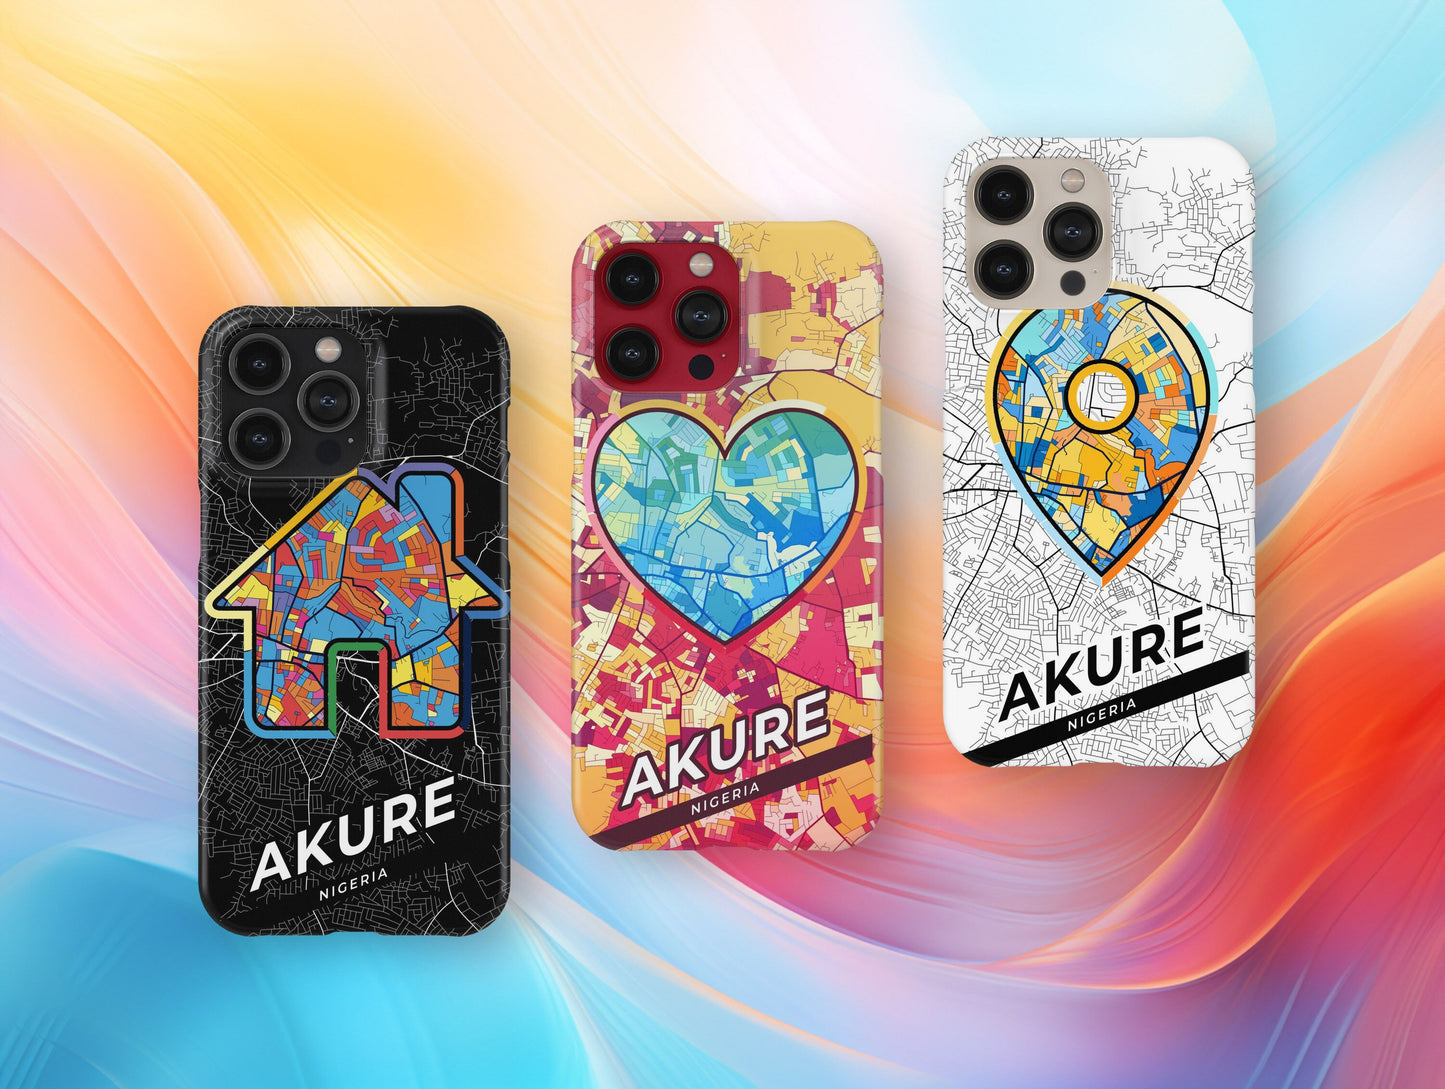 Akure Nigeria slim phone case with colorful icon. Birthday, wedding or housewarming gift. Couple match cases.